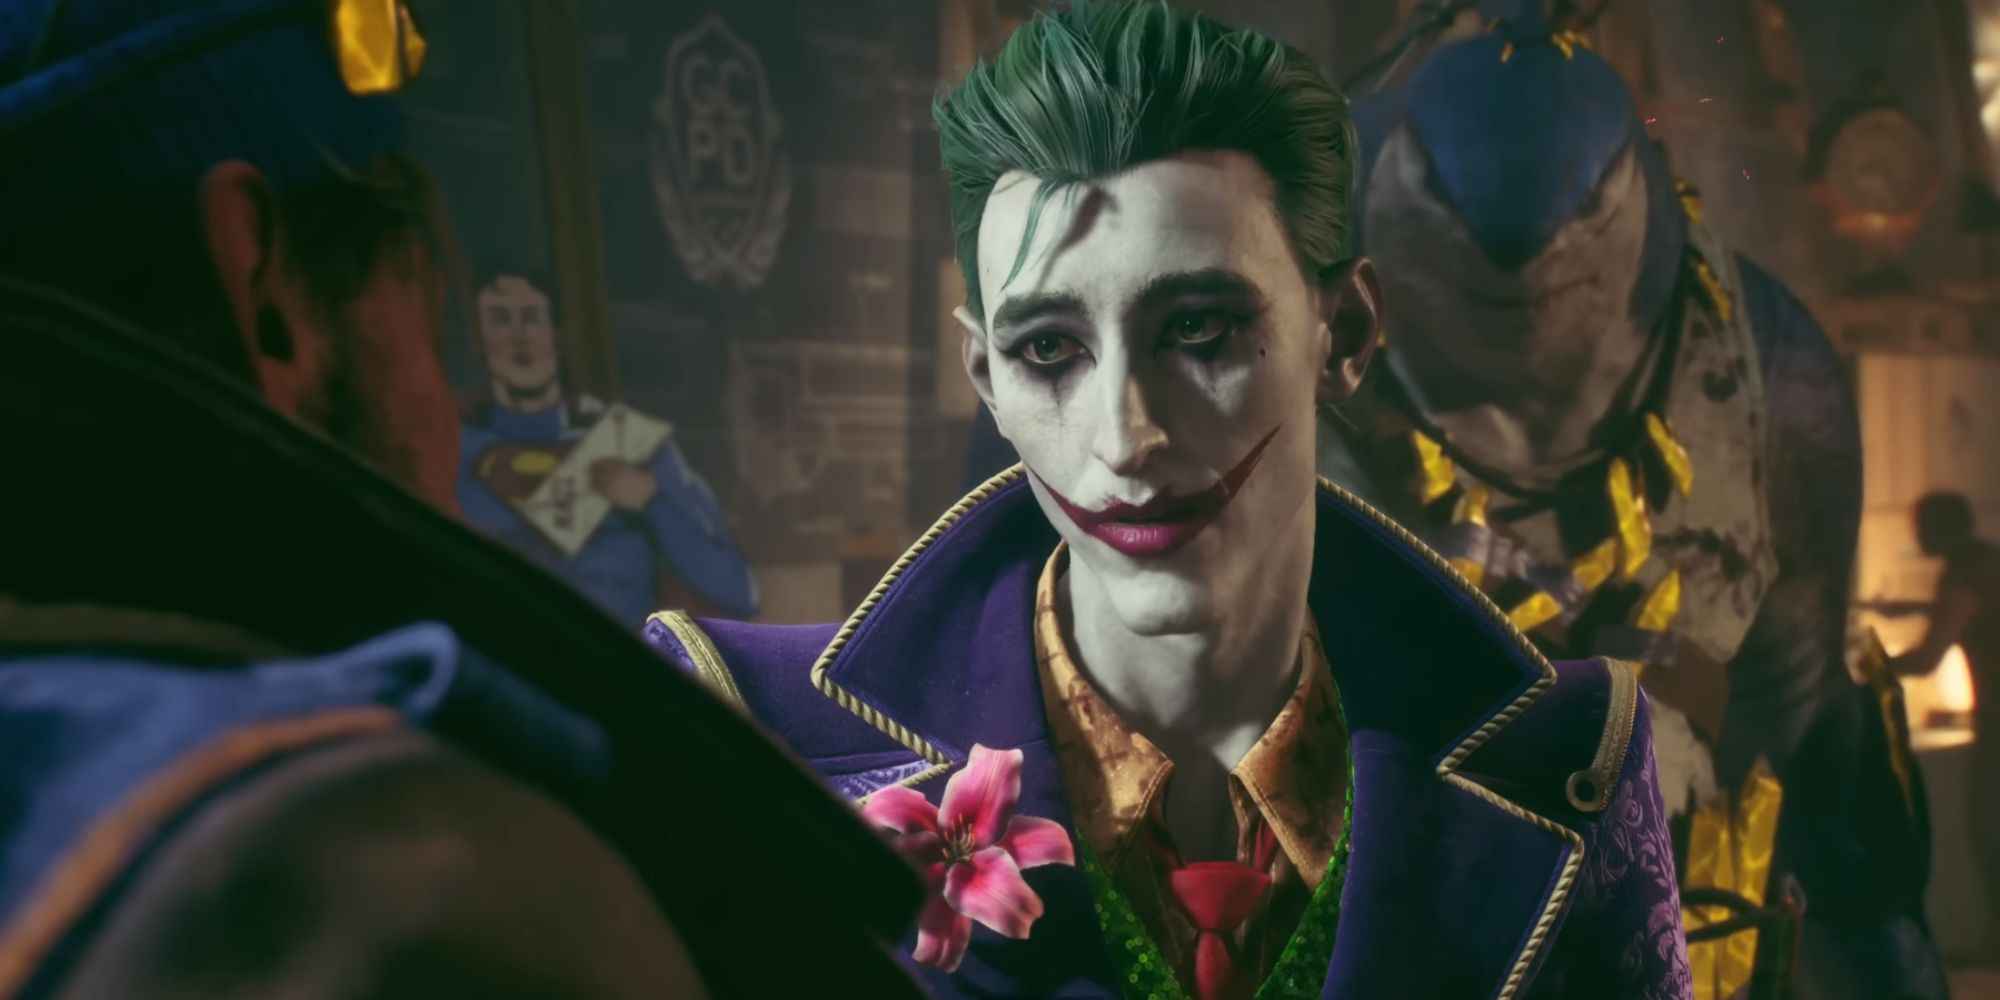 The Joker as he appears in Suicide Squad: Kill the Justice League